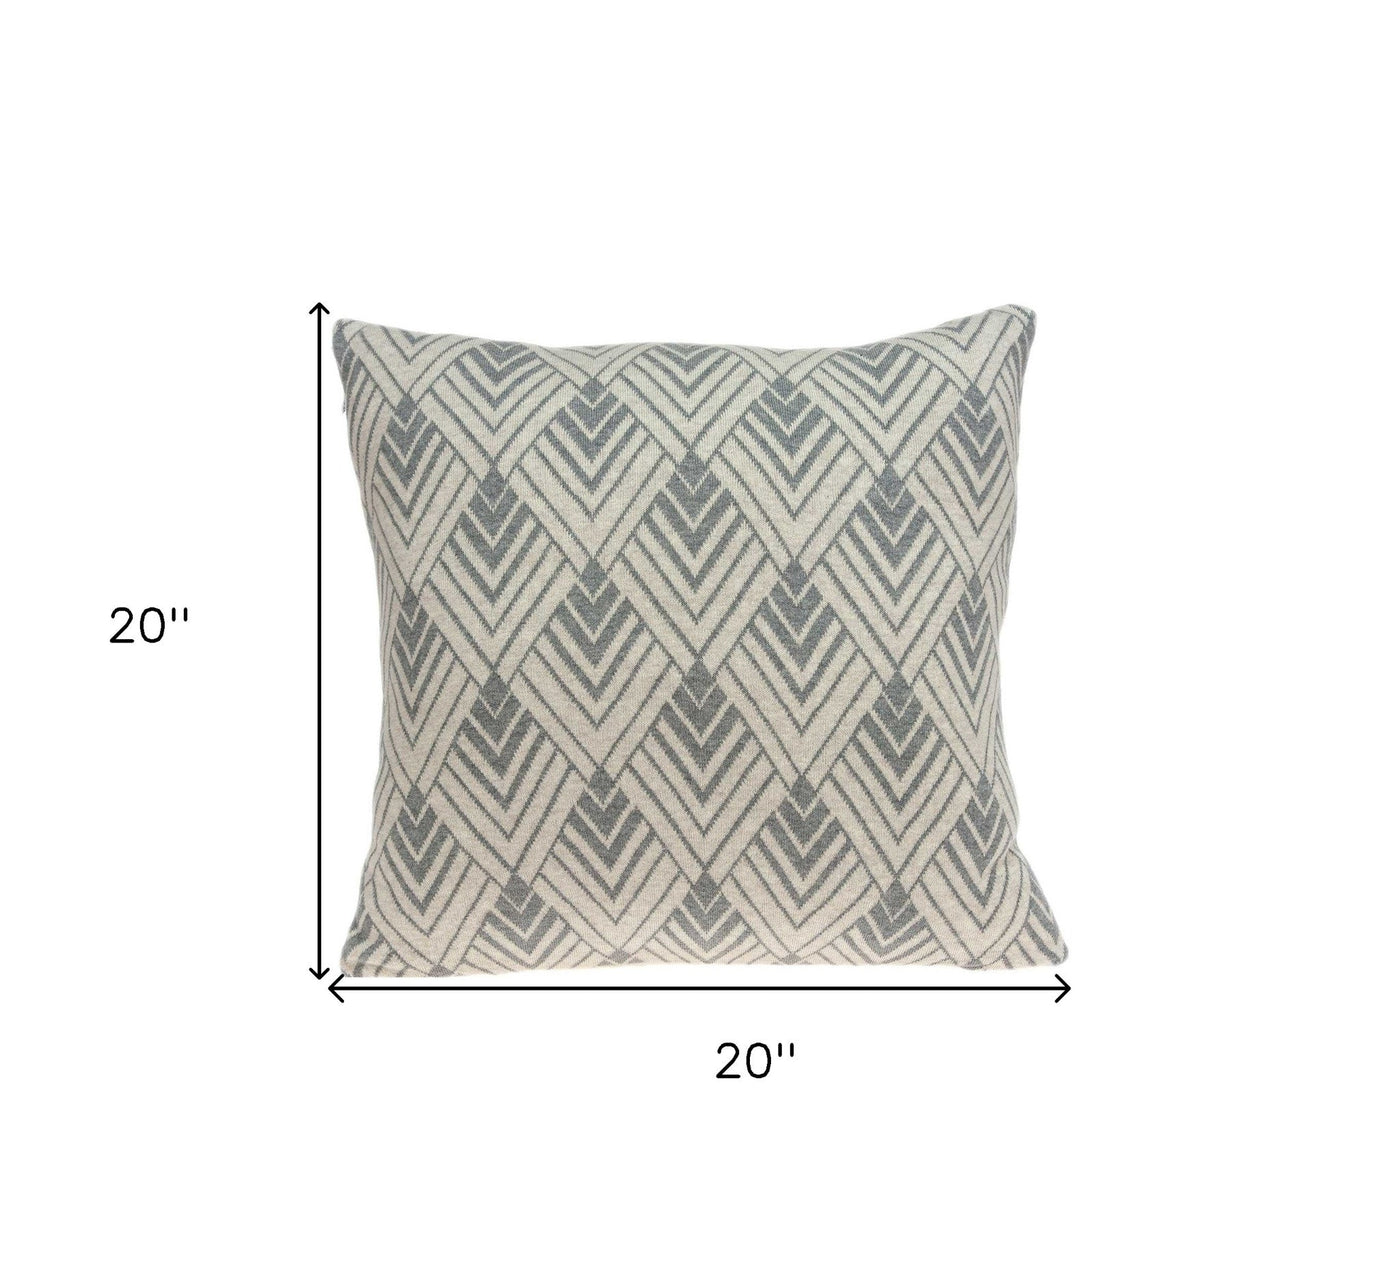 20’ X 7’ X 20’ Beautiful Transitional Tan Cotton Pillow Cover With Poly Insert - Accent Throw Pillows